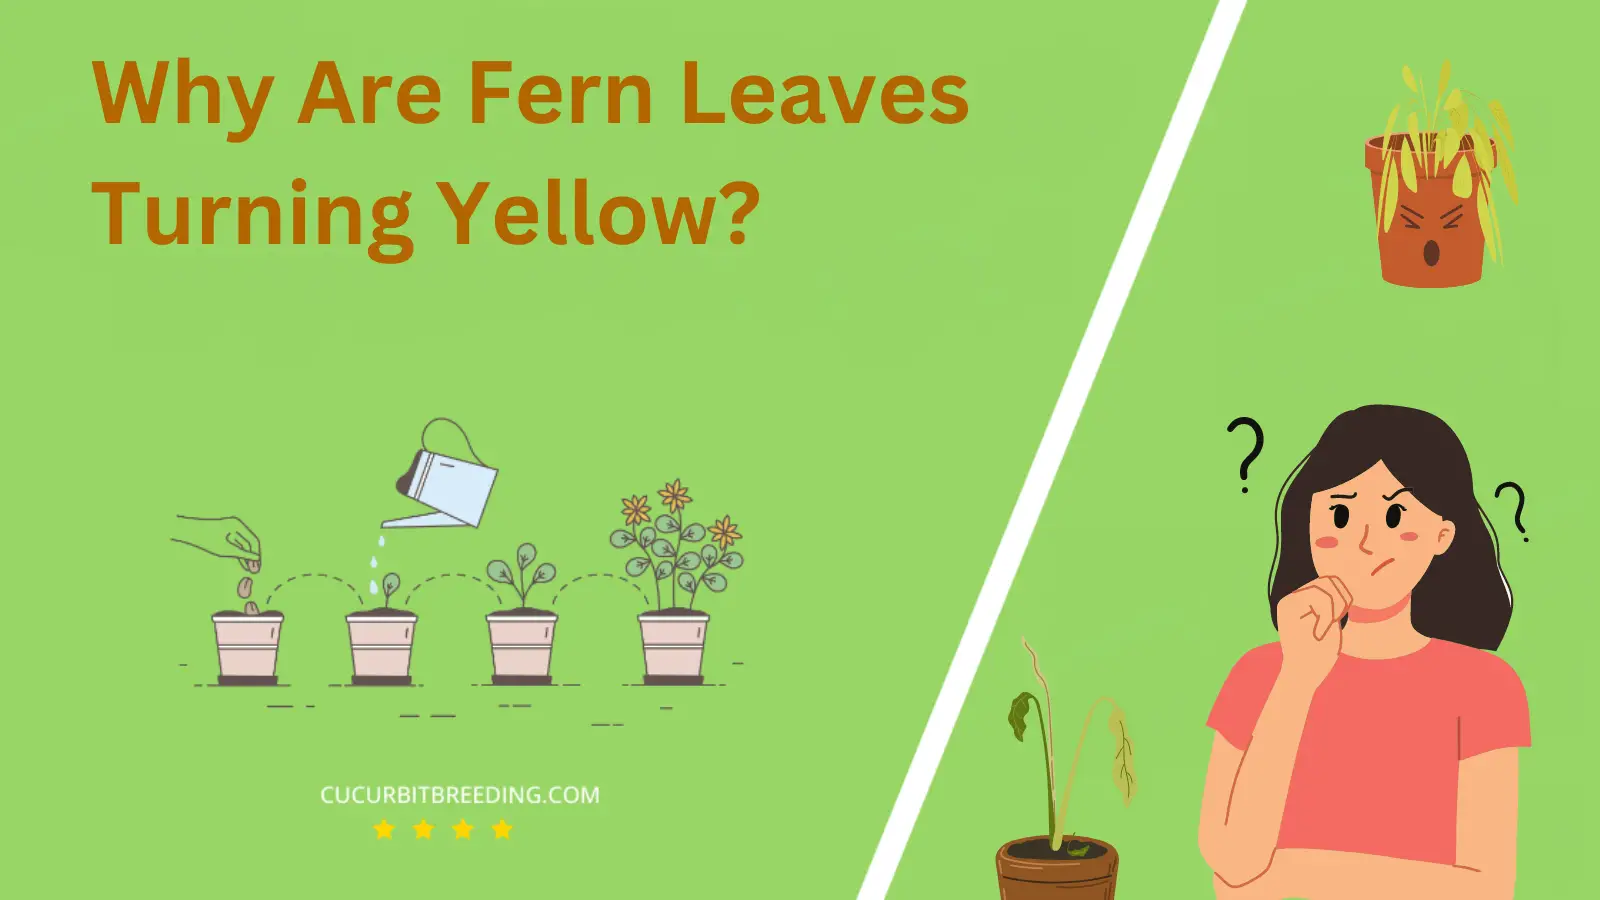 Why Are Fern Leaves Turning Yellow